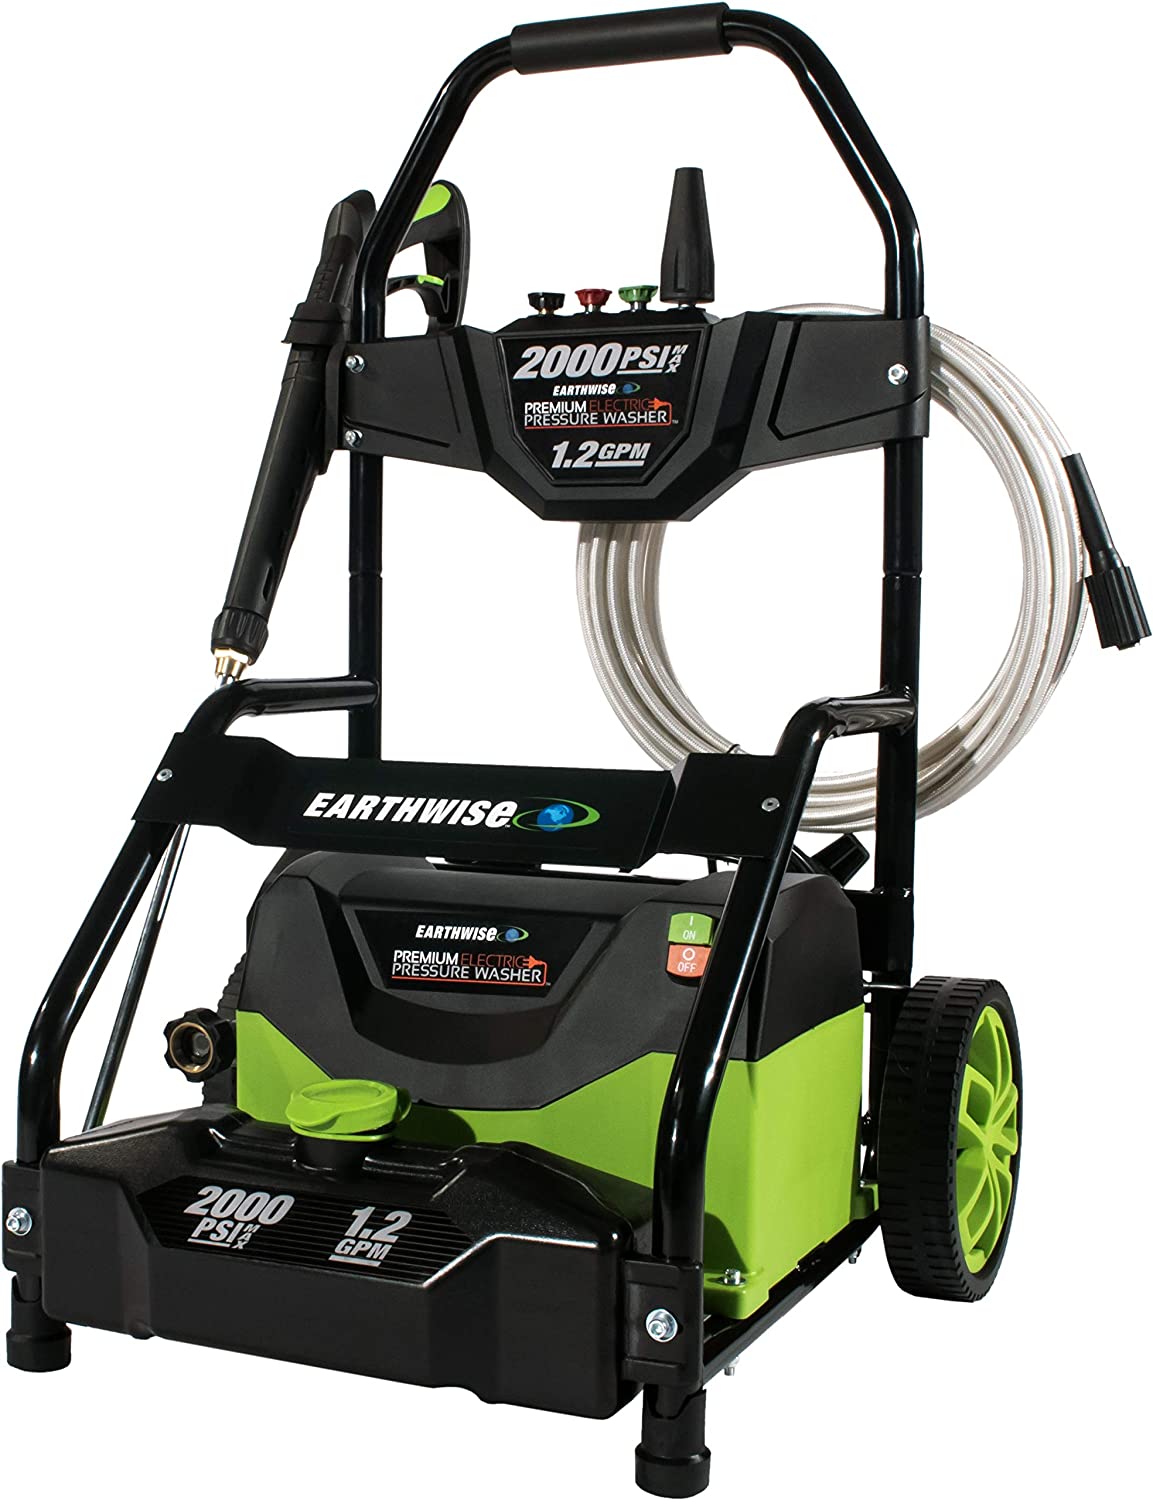 Earthwise Power Tools by ALM 2000 PSI 13-Amp 120V Corded Pressure Washer